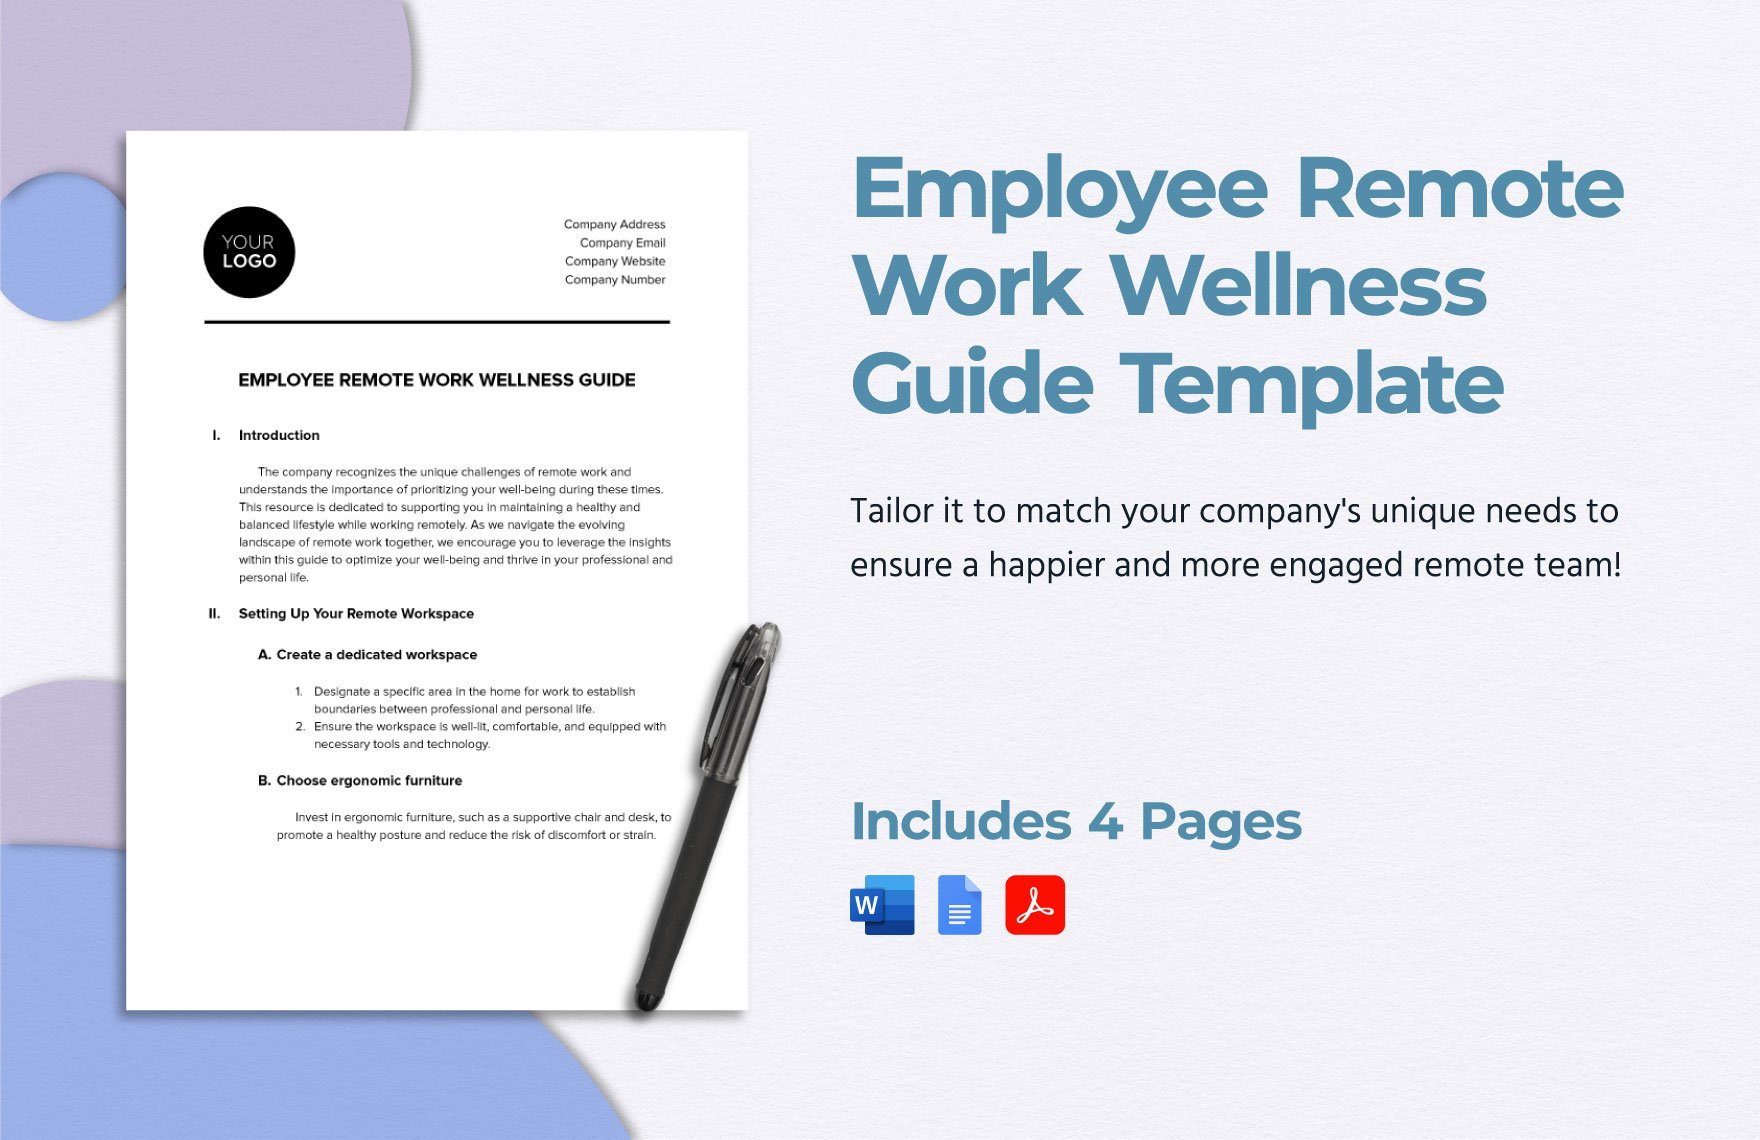 Employee Remote Work Wellness Guide Template